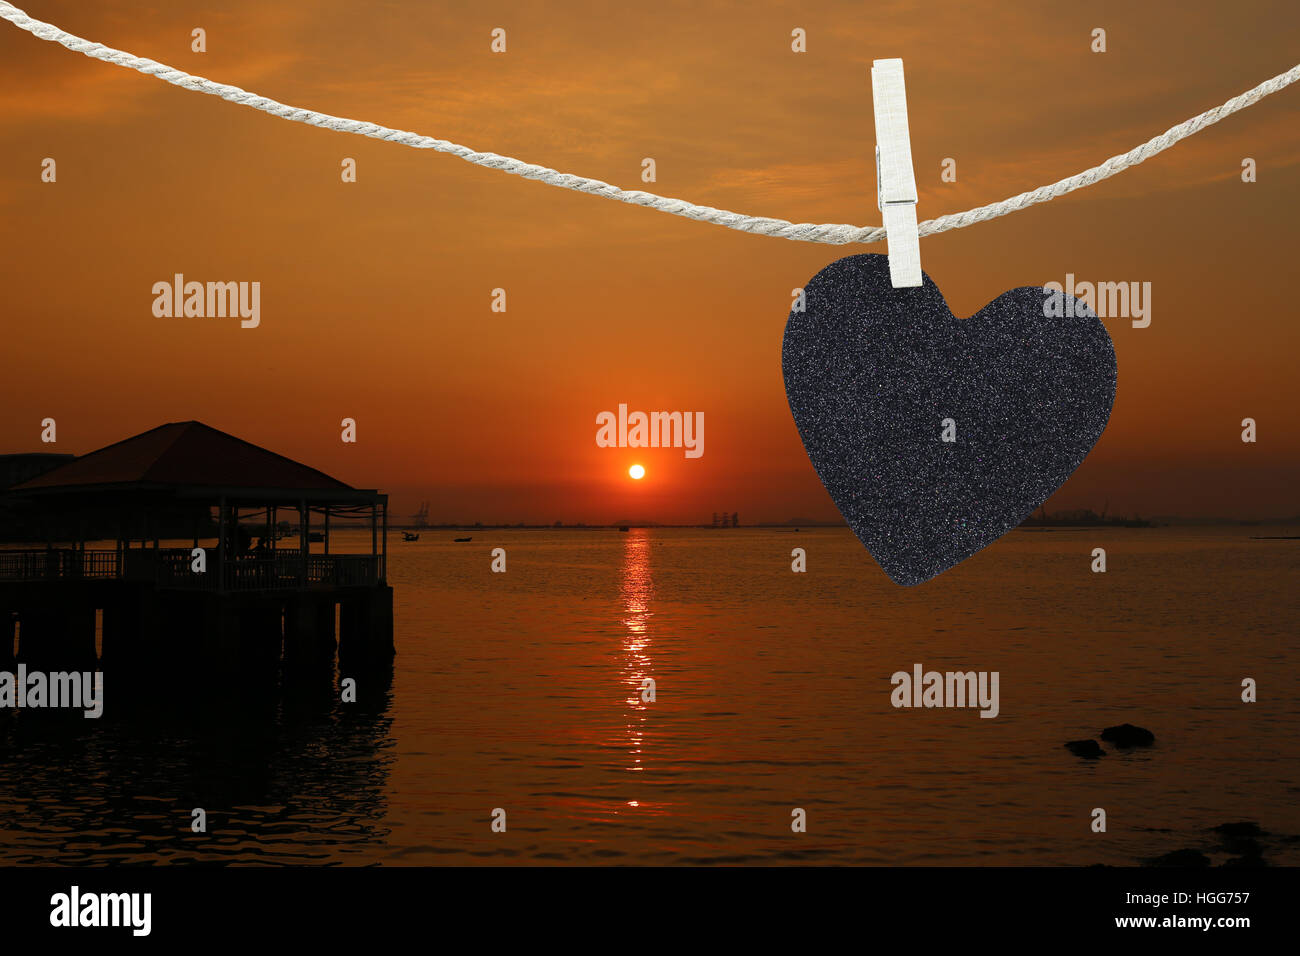 Black Heart hung on hemp rope on view sunset background and have copy space to manage the text you want. Stock Photo